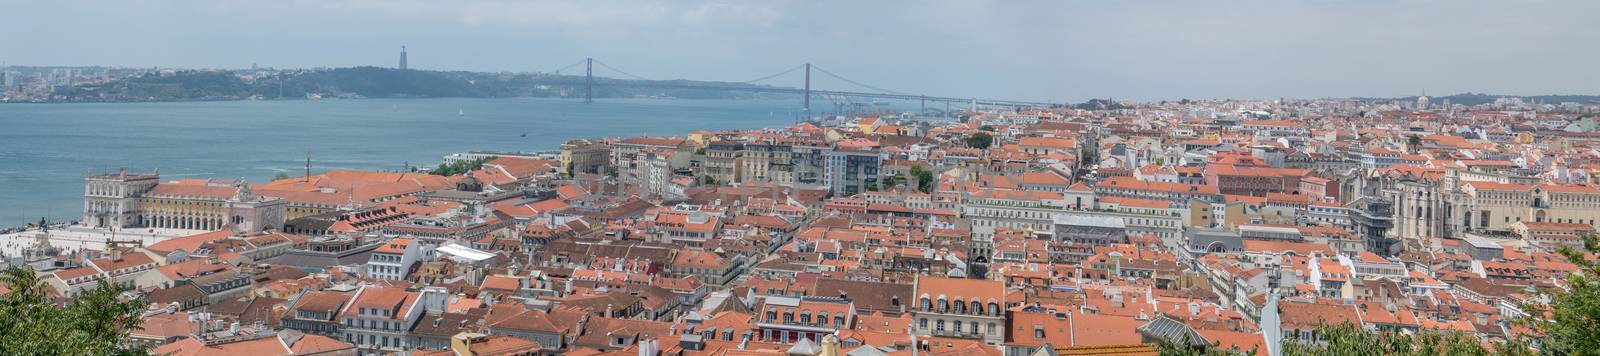 discovery of the city of Lisbon in Portugal. Romantic weekend in Europe. by shovag